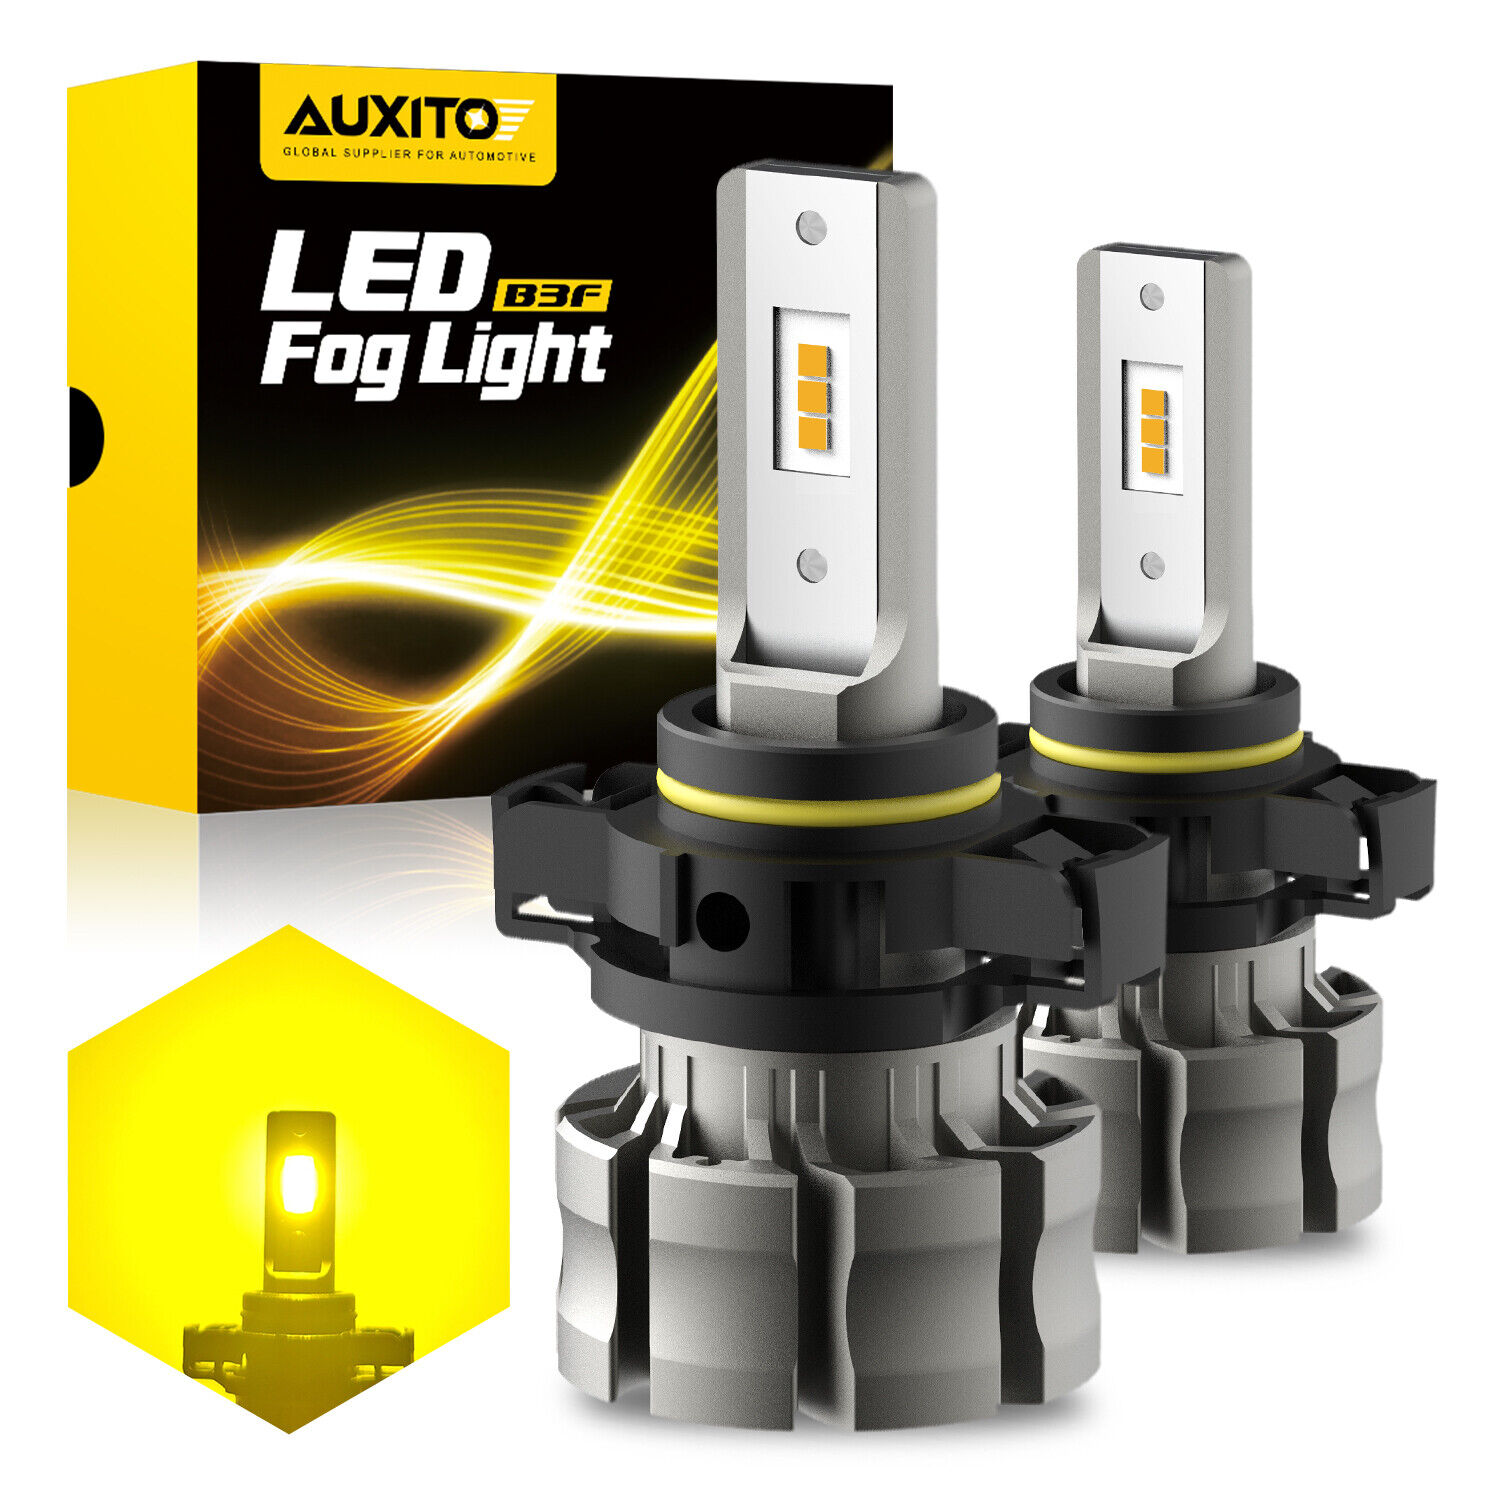 AUXITO CANBUS 2504 5202 LED Fog Light Bulbs 3000K Yellow Extremely bright B3F